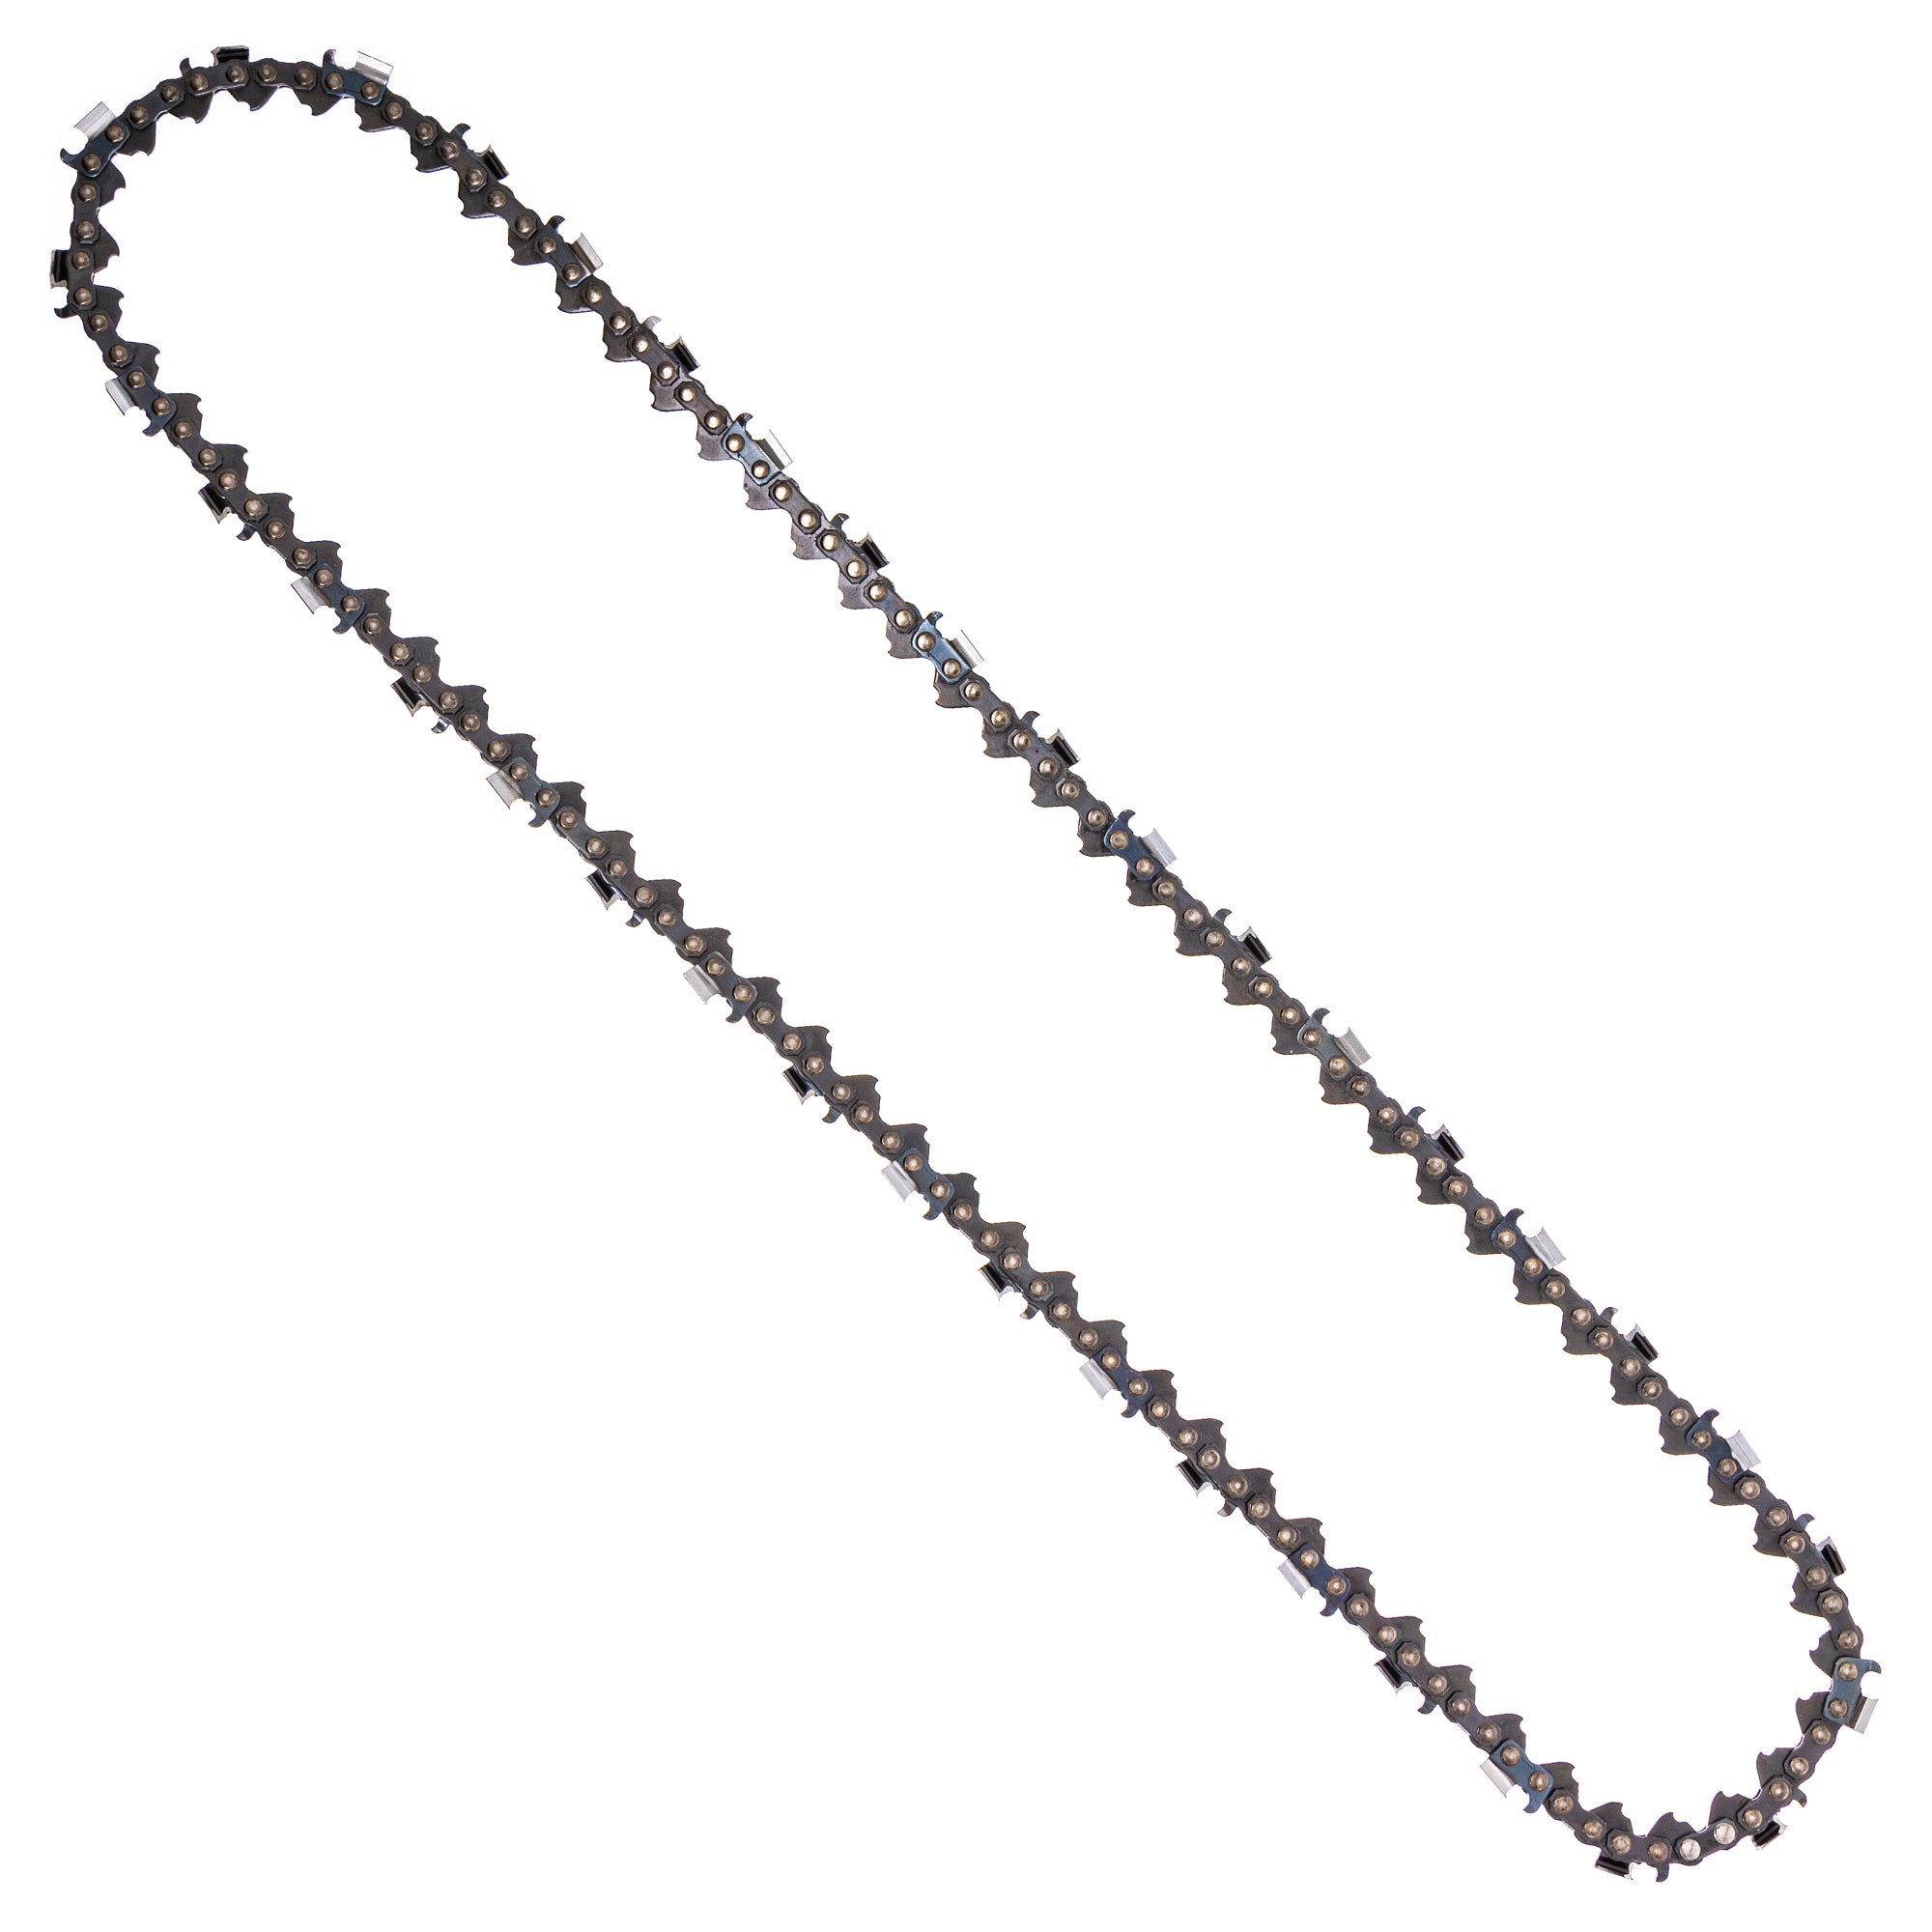 8TEN 810-CCC2230H Chain 4-Pack for zOTHER Stens Oregon Husqvarna